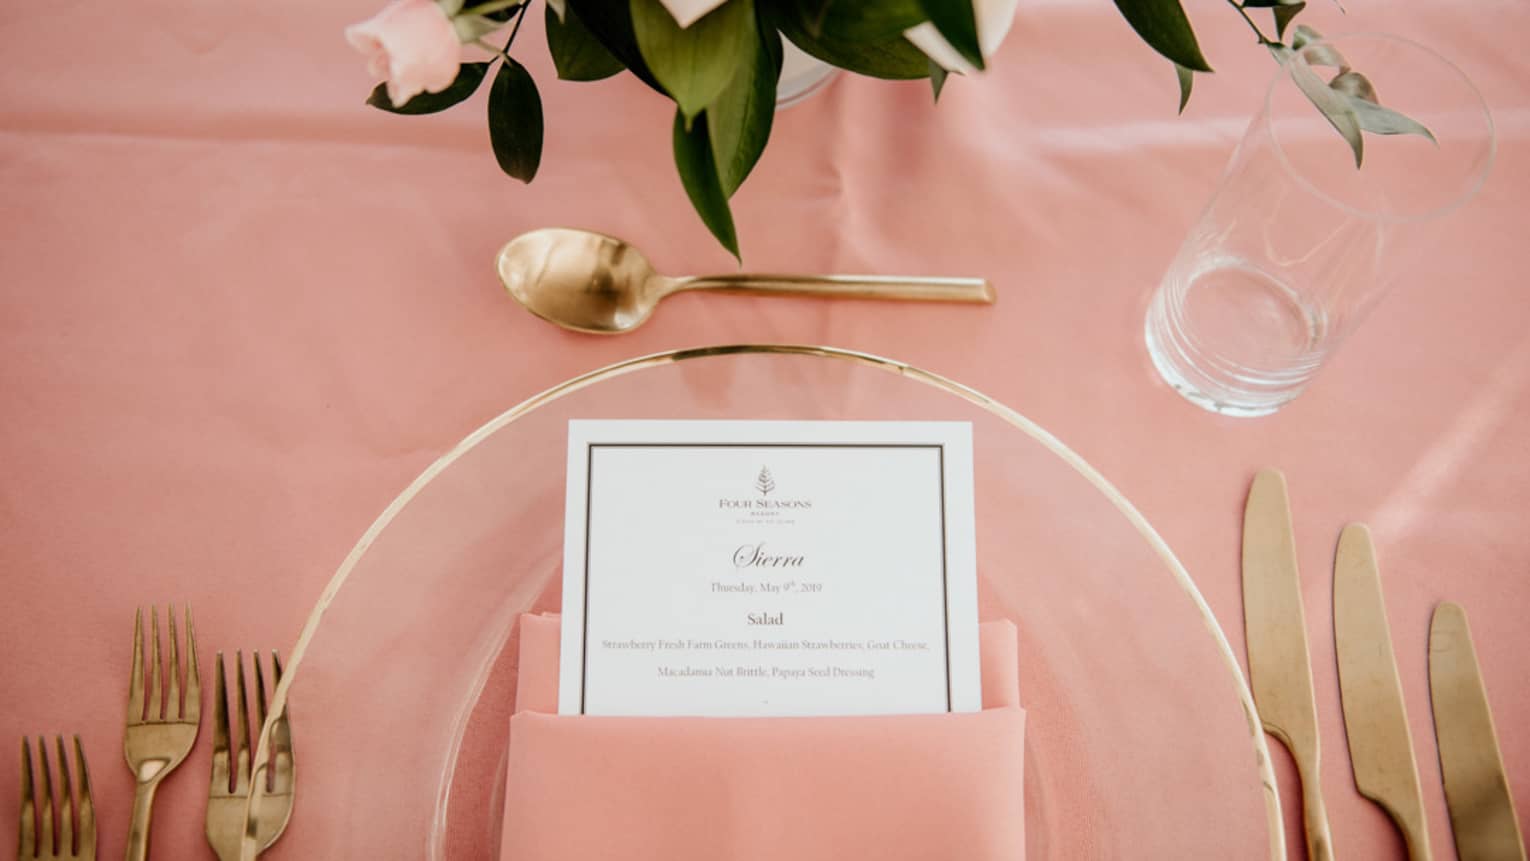 Pink wedding table setting with gold flatware, elegant place card and pink bouquet